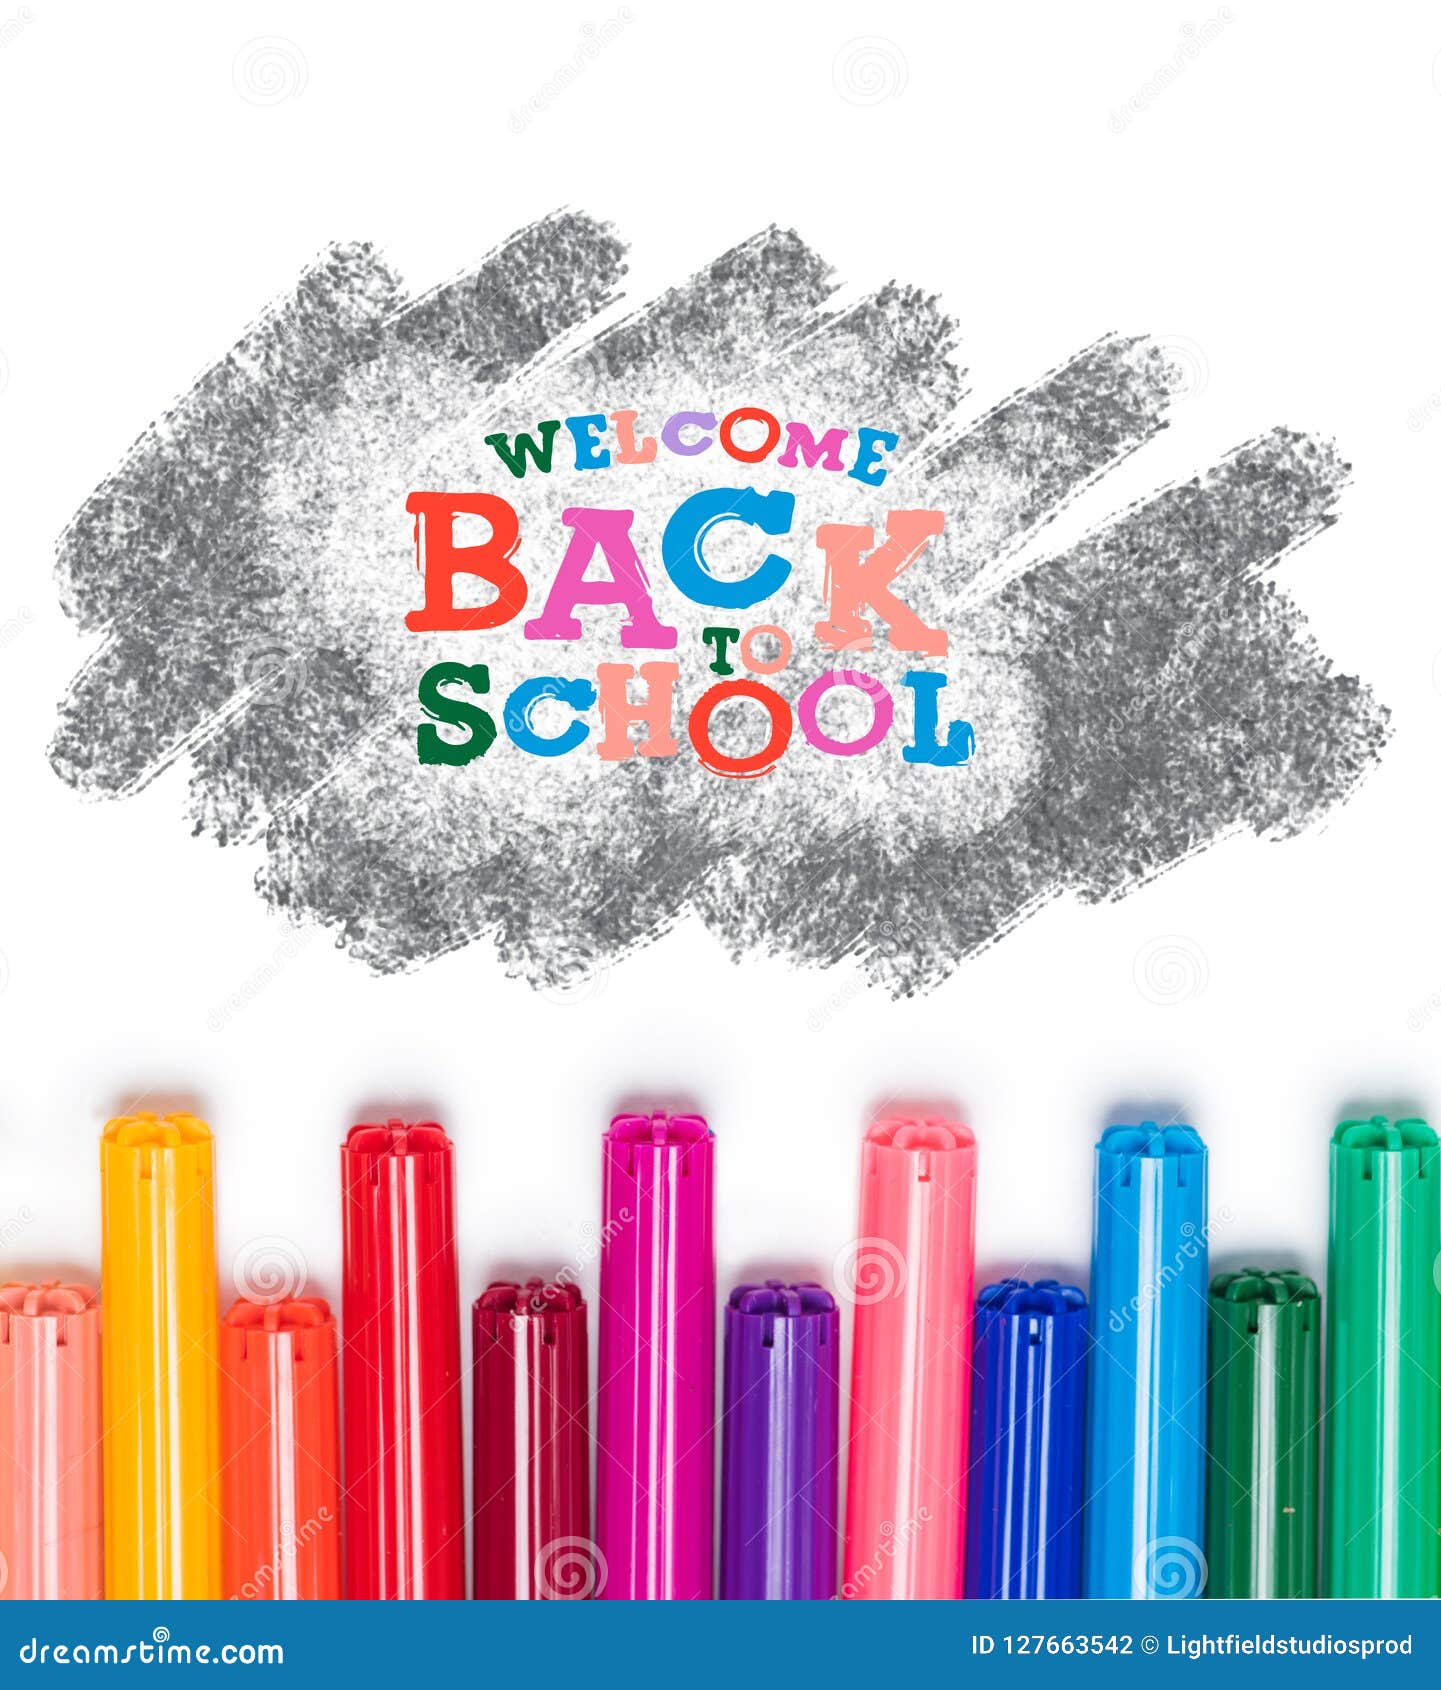 4 5 Welcome Back To School Photos Free Royalty Free Stock Photos From Dreamstime